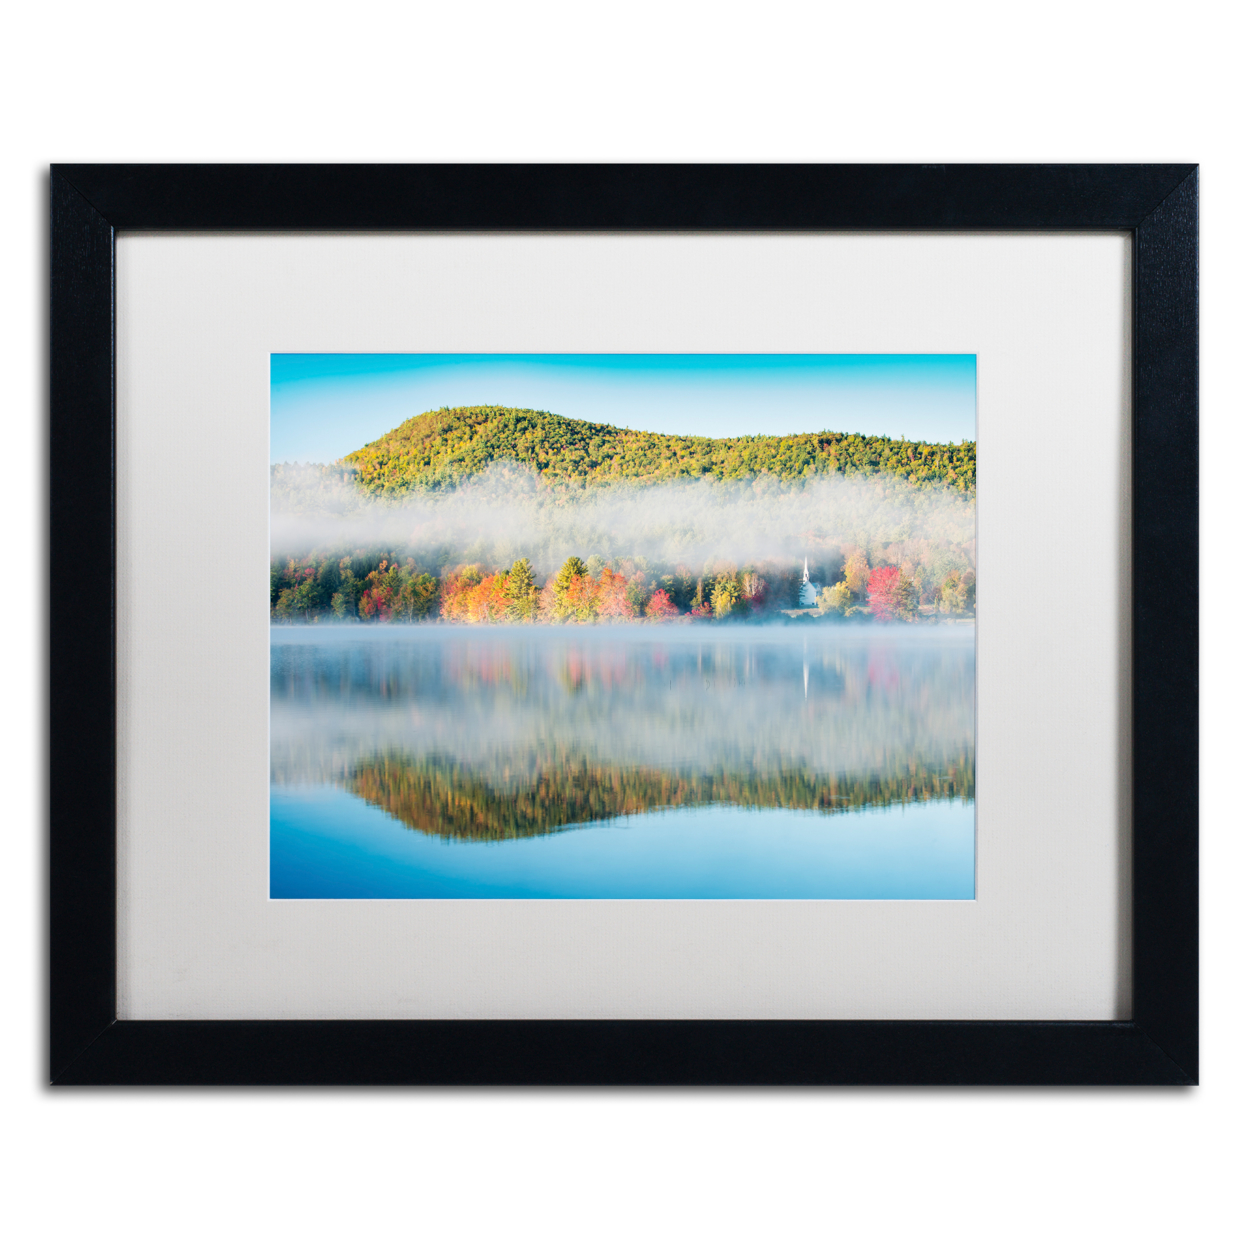 Michael Blanchette Photography 'Fog On Crystal Lake' Black Wooden Framed Art 18 X 22 Inches